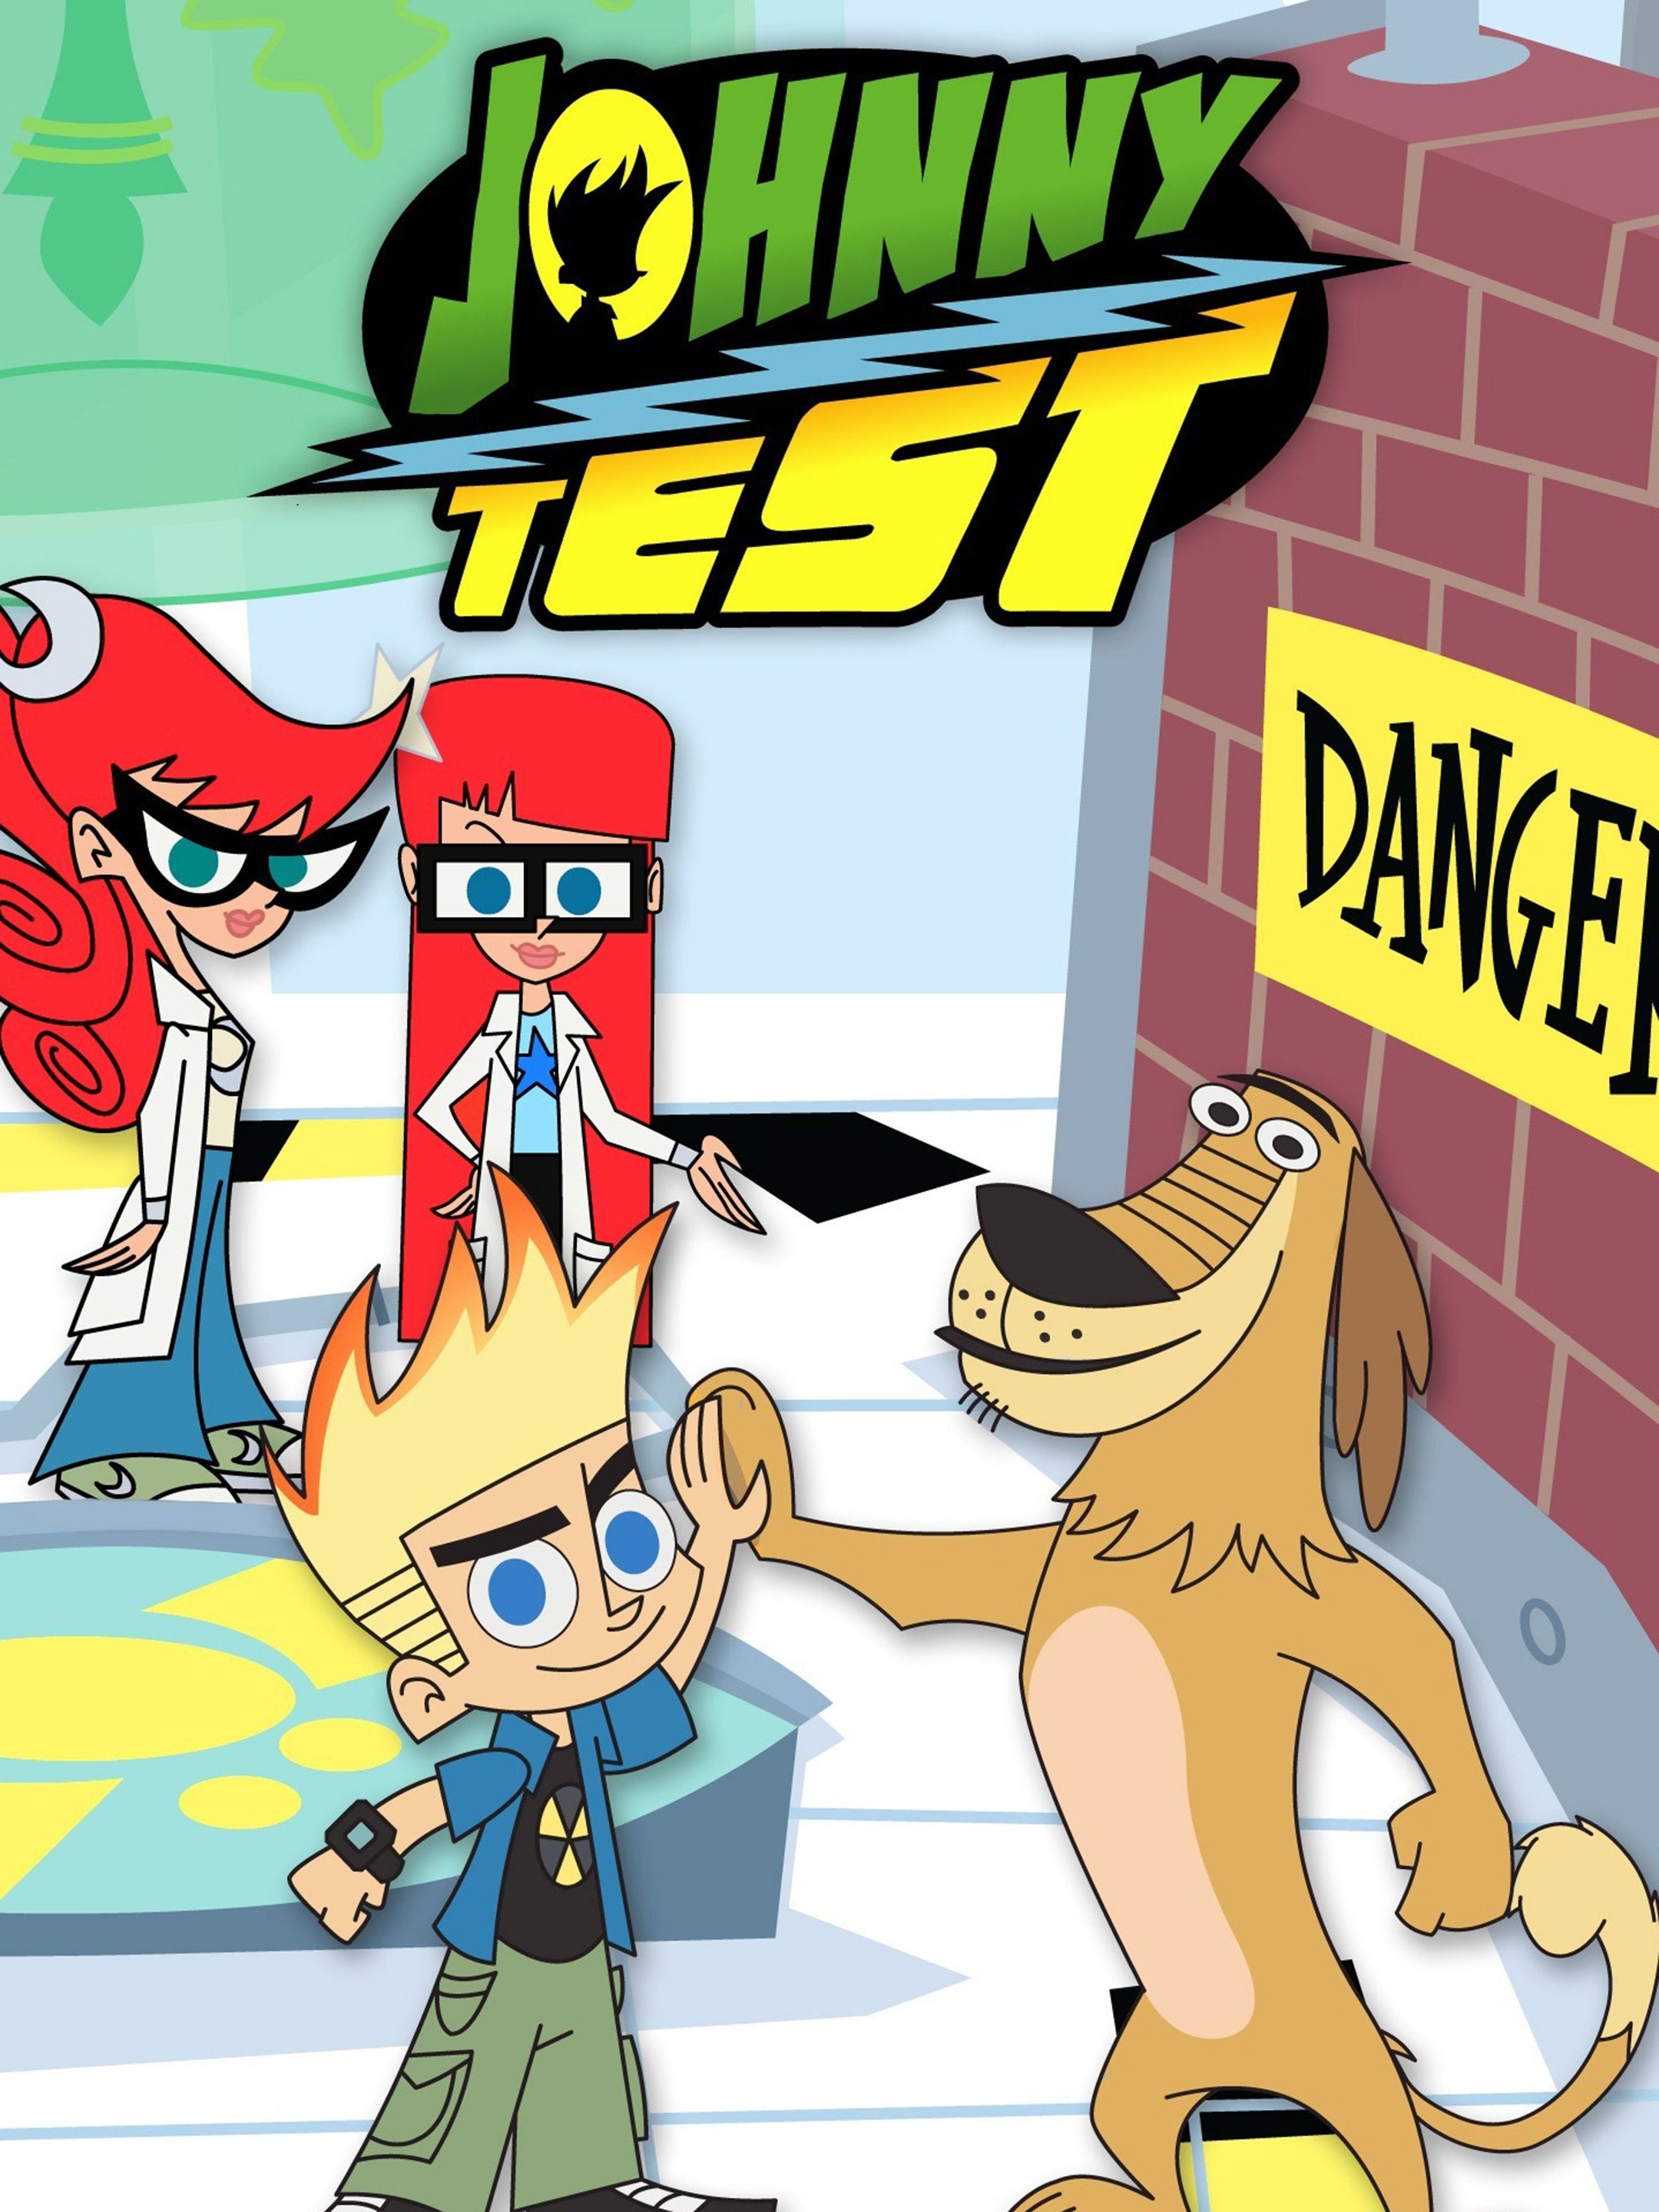 Johnny Test Rotten Tomatoes